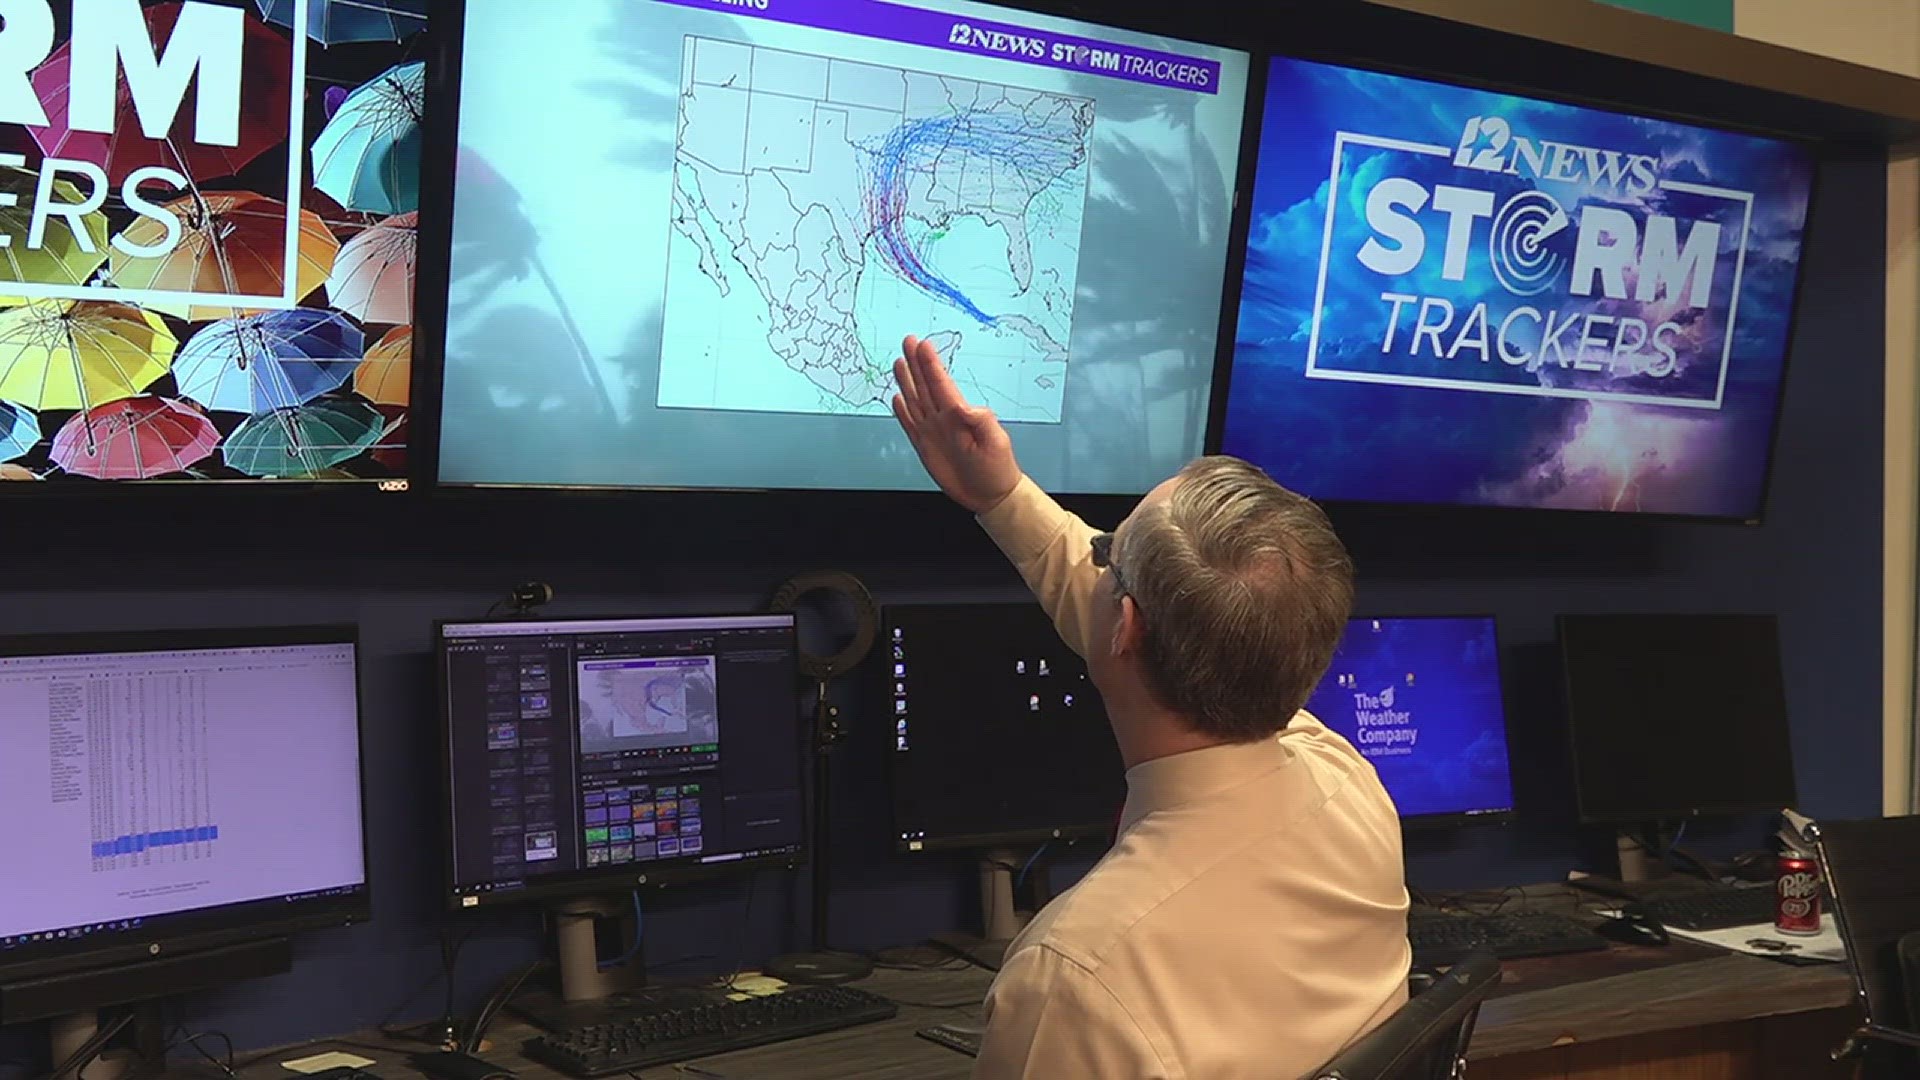 National Weather Service Meteorologist Doug Cramer tells 12News, hurricane forecasts are getting more accurate. 12News Chief Meteorologist Patrick Vaughn agrees.